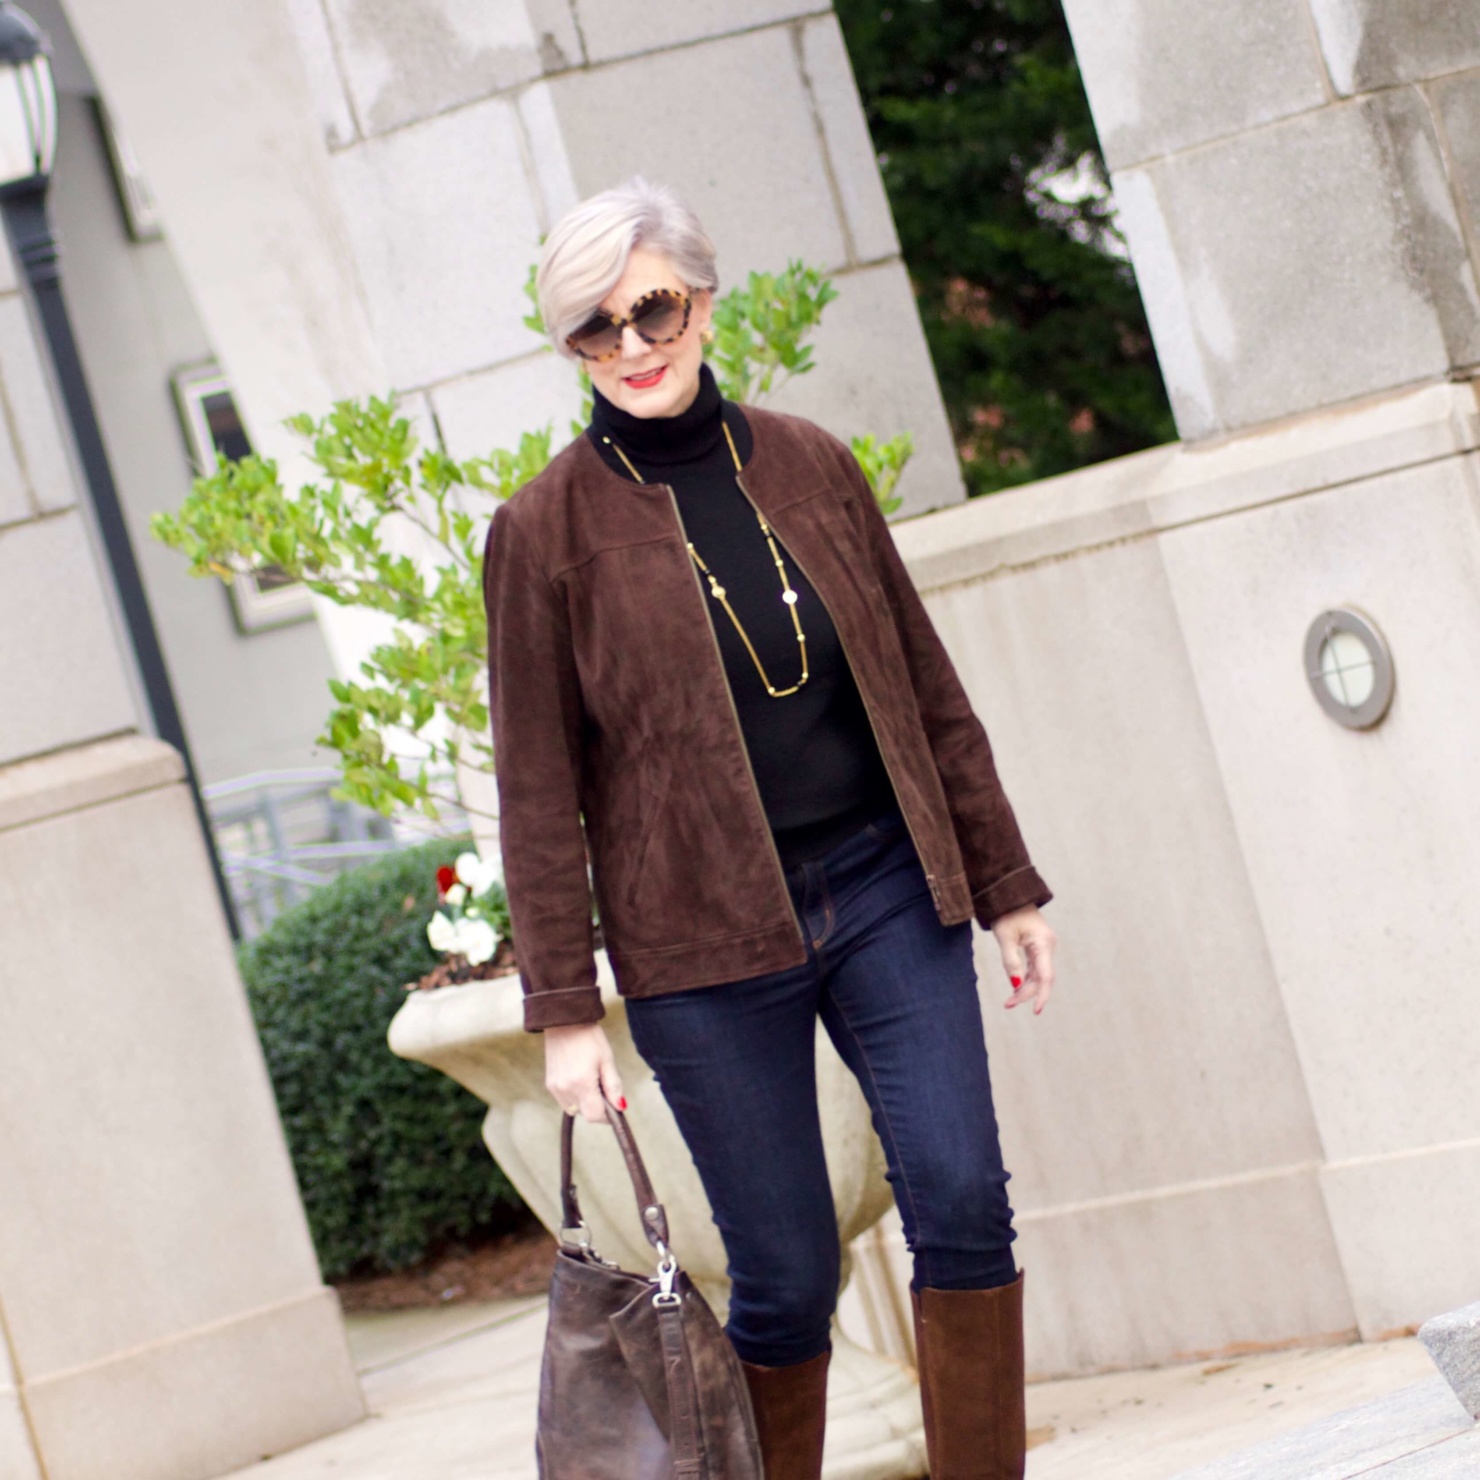 beth from Style at a Certain Age wears a black turtleneck, brown suede jacket, dark rinse denim and suede riding boots